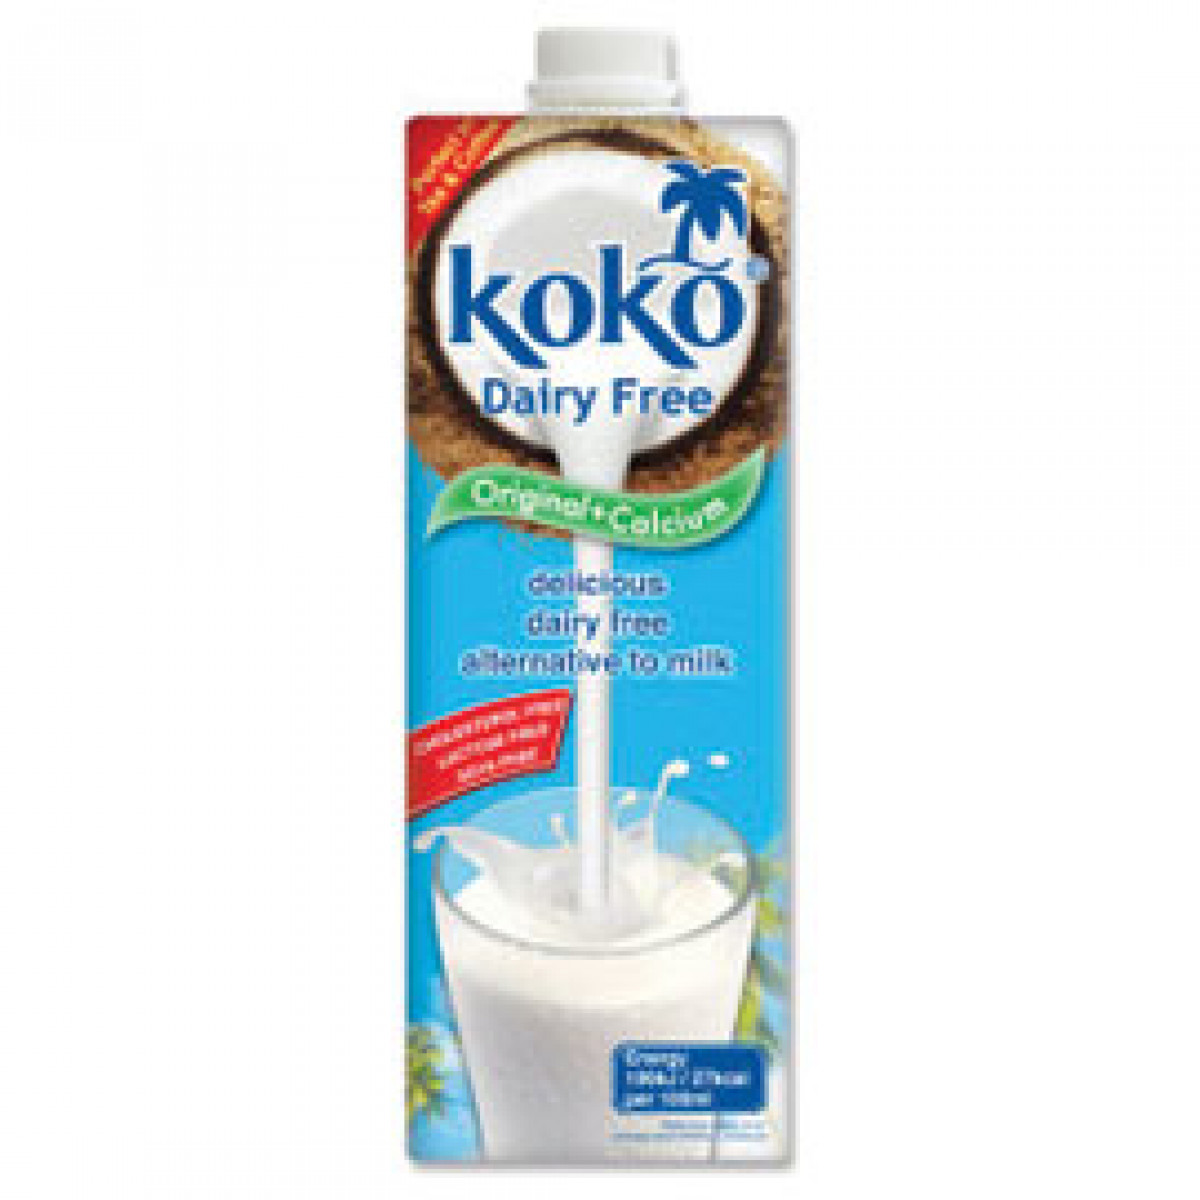 Product picture for Dairy Free Original Coconut Drink & Calcium